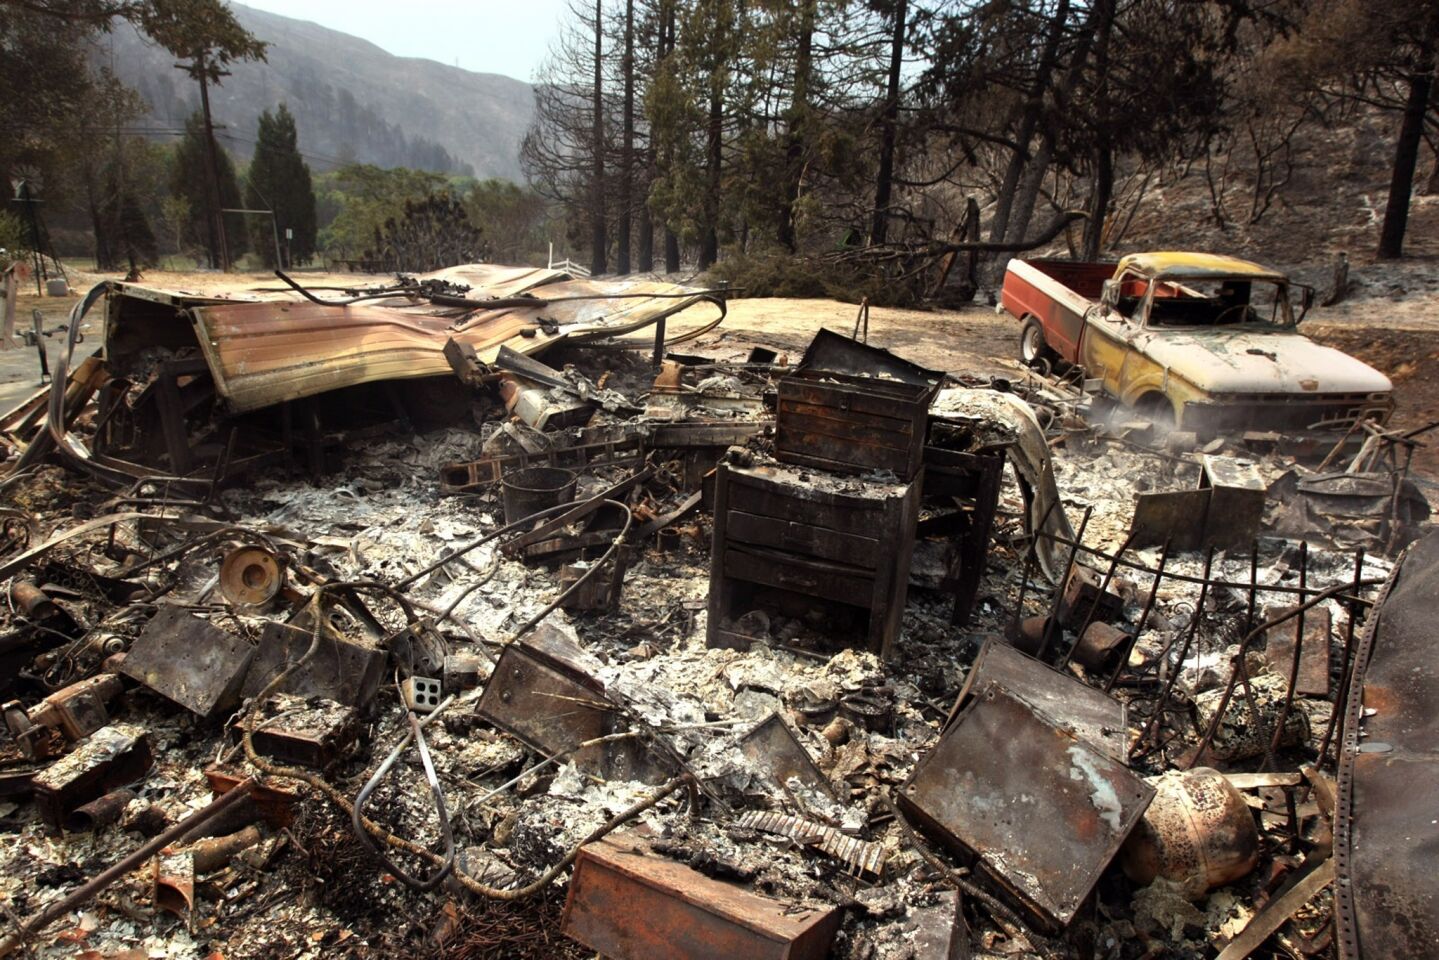 A truck was damaged along with a storage structure in the Powerhouse fire in Lake Hughes.